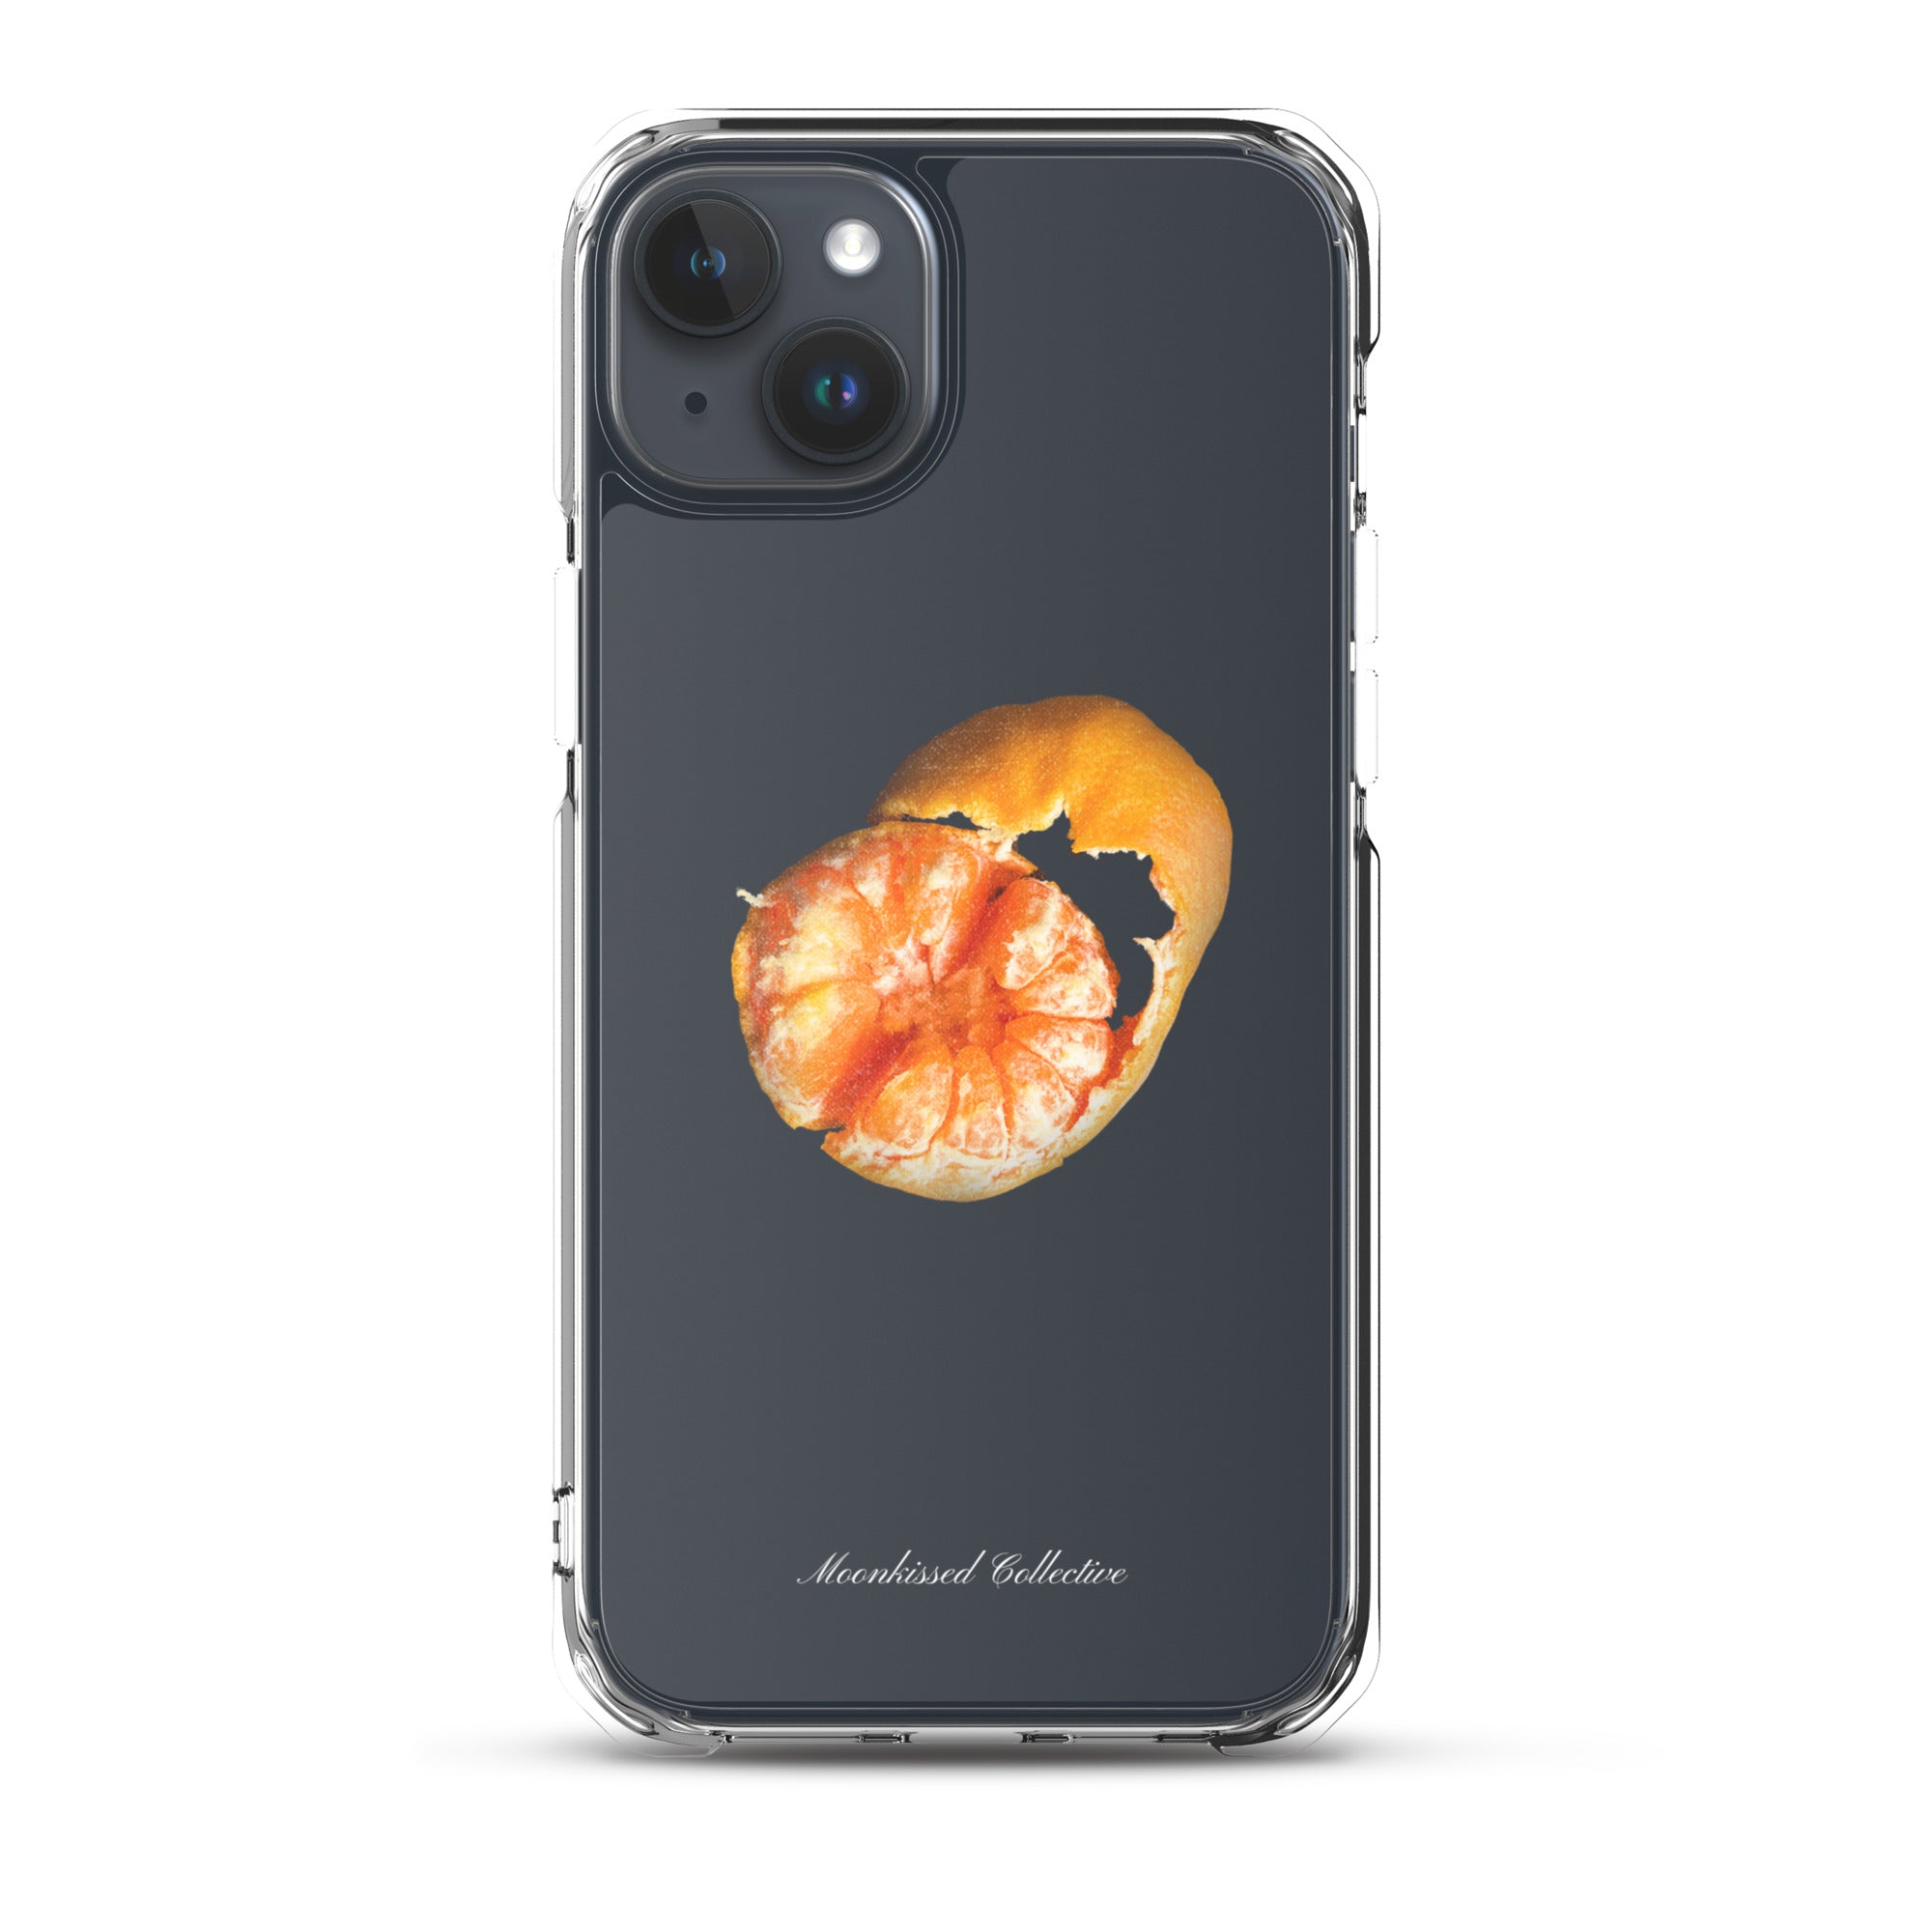 Clementine iPhone Case